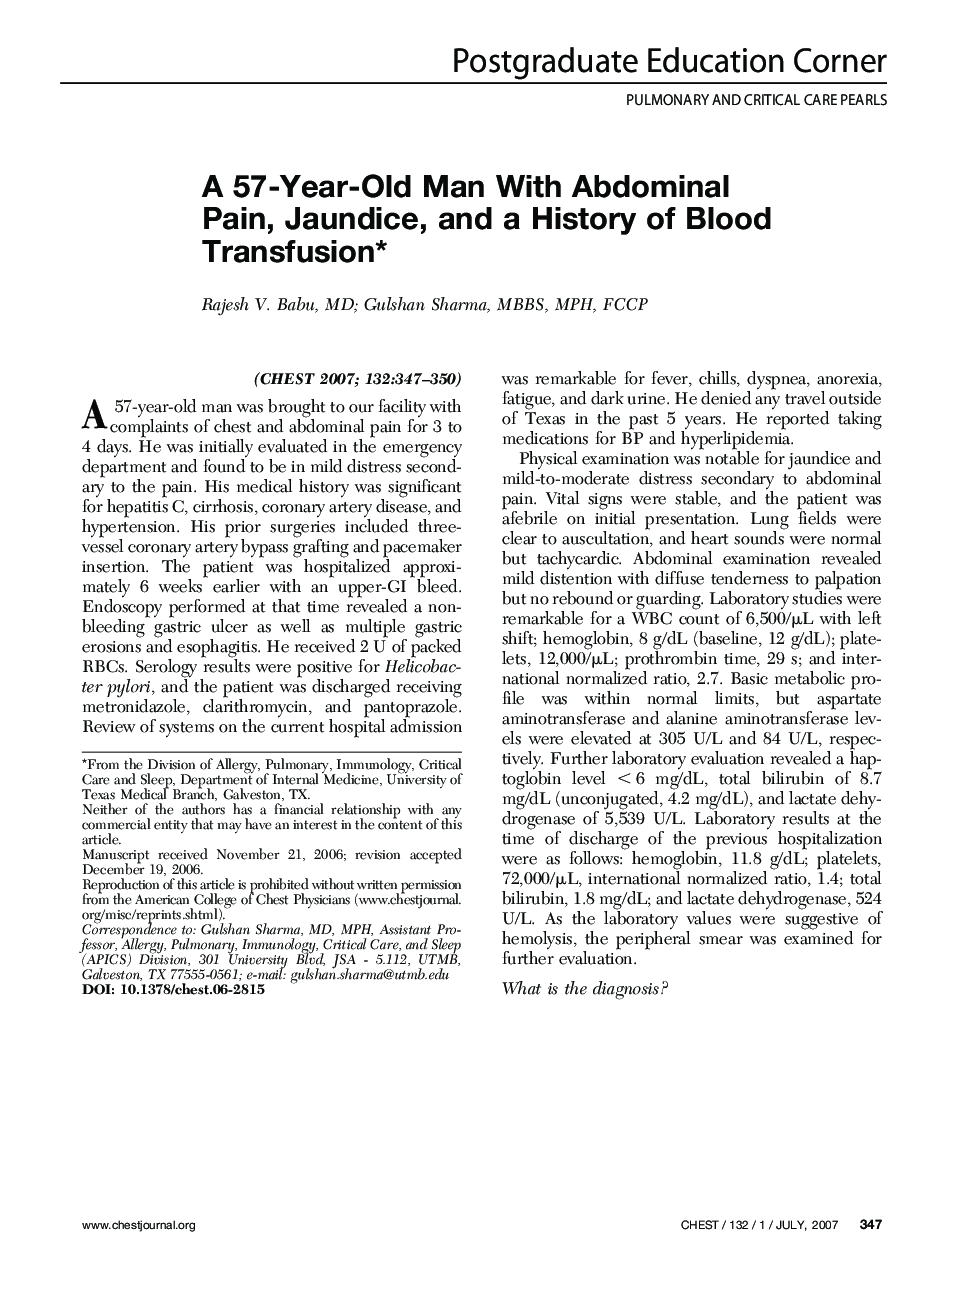 A 57-Year-Old Man With Abdominal Pain, Jaundice, and a History of Blood Transfusion